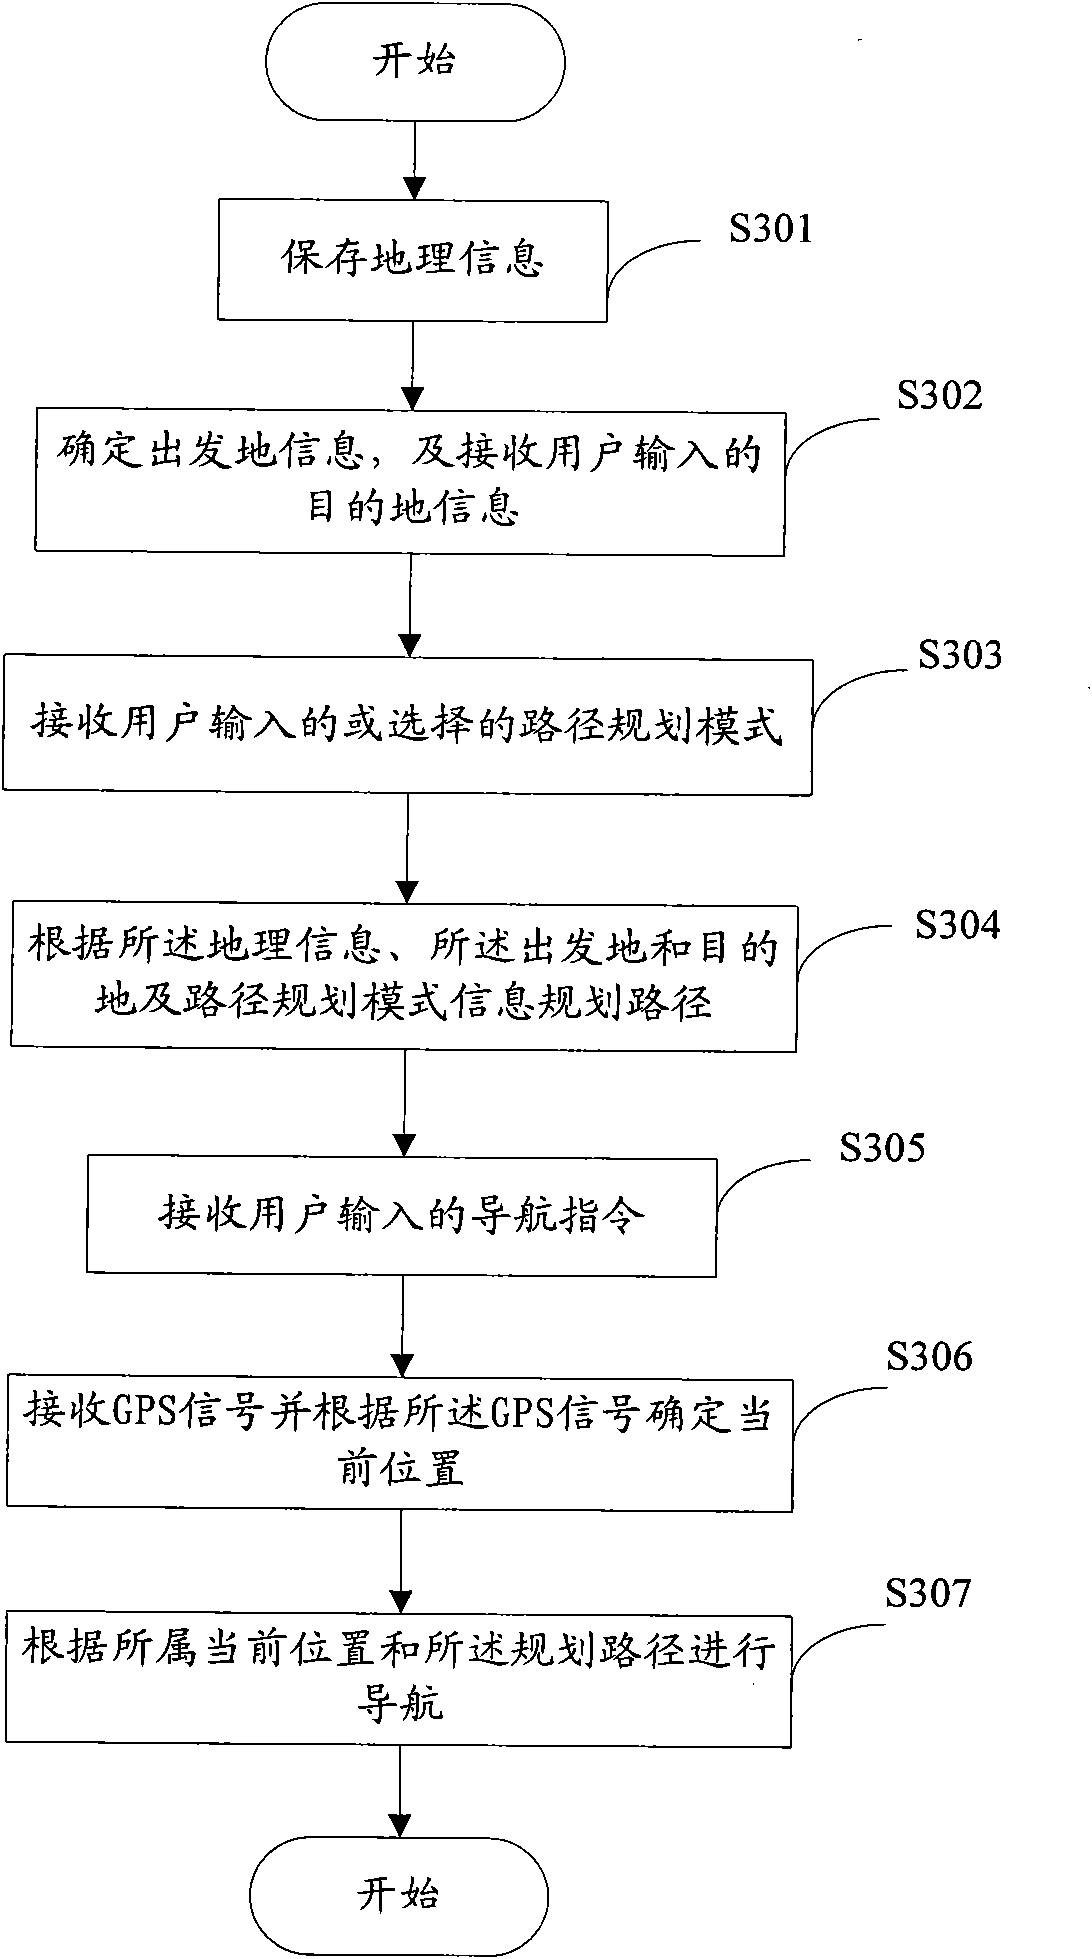 Navigation equipment, method for displaying journey introduction and path thereof and navigation method thereof